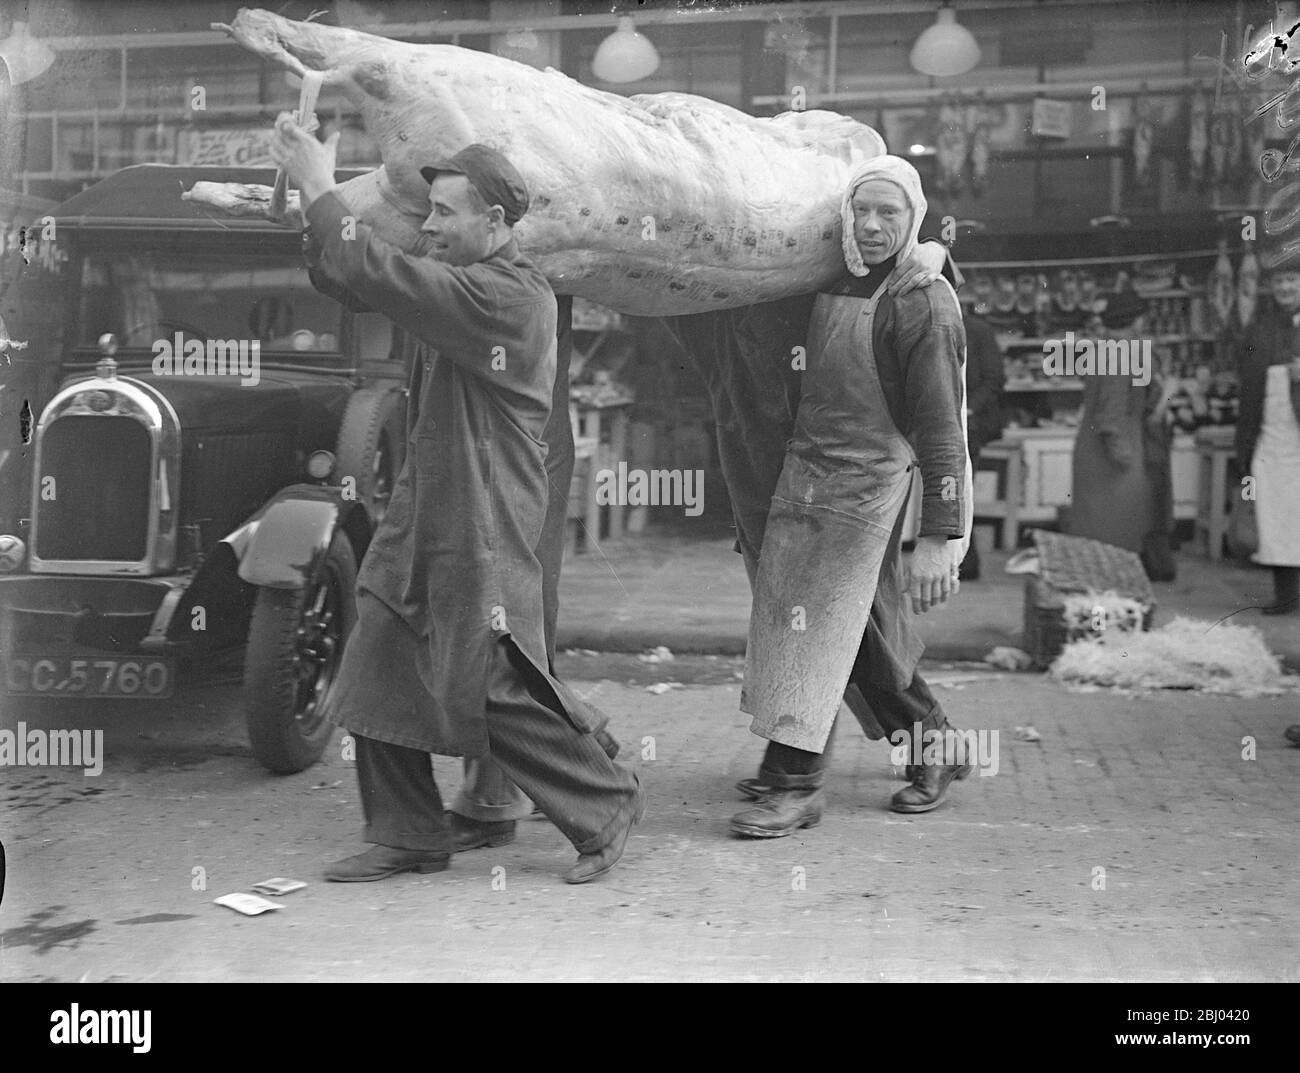 A Baron of beef, weighing 30 stone has arrived at Smithfield Market on its way to the Lord Mayor's banquet, which takes place on - 9 November - . - Photo shows,porters carrying two weighty Baron of beef at Smithfield. - 5 November 1937 Stock Photo